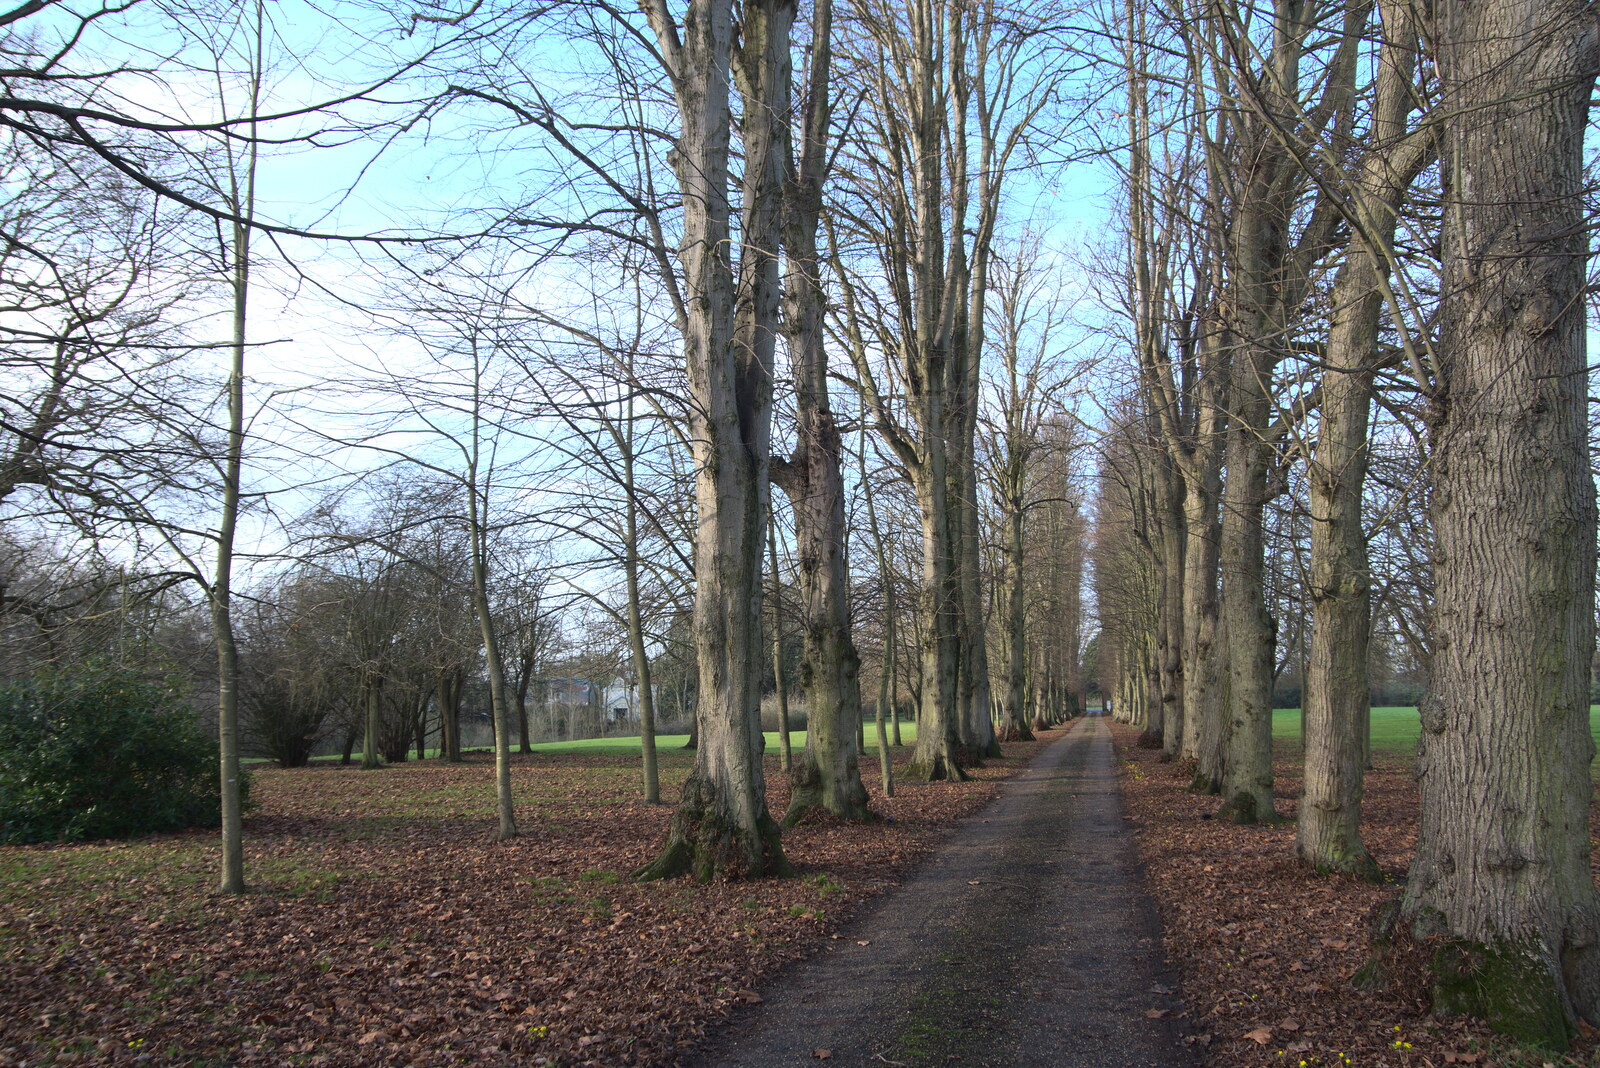 The Oaksmere drive from New Year's Day, Brome, Suffolk - 1st January 2022